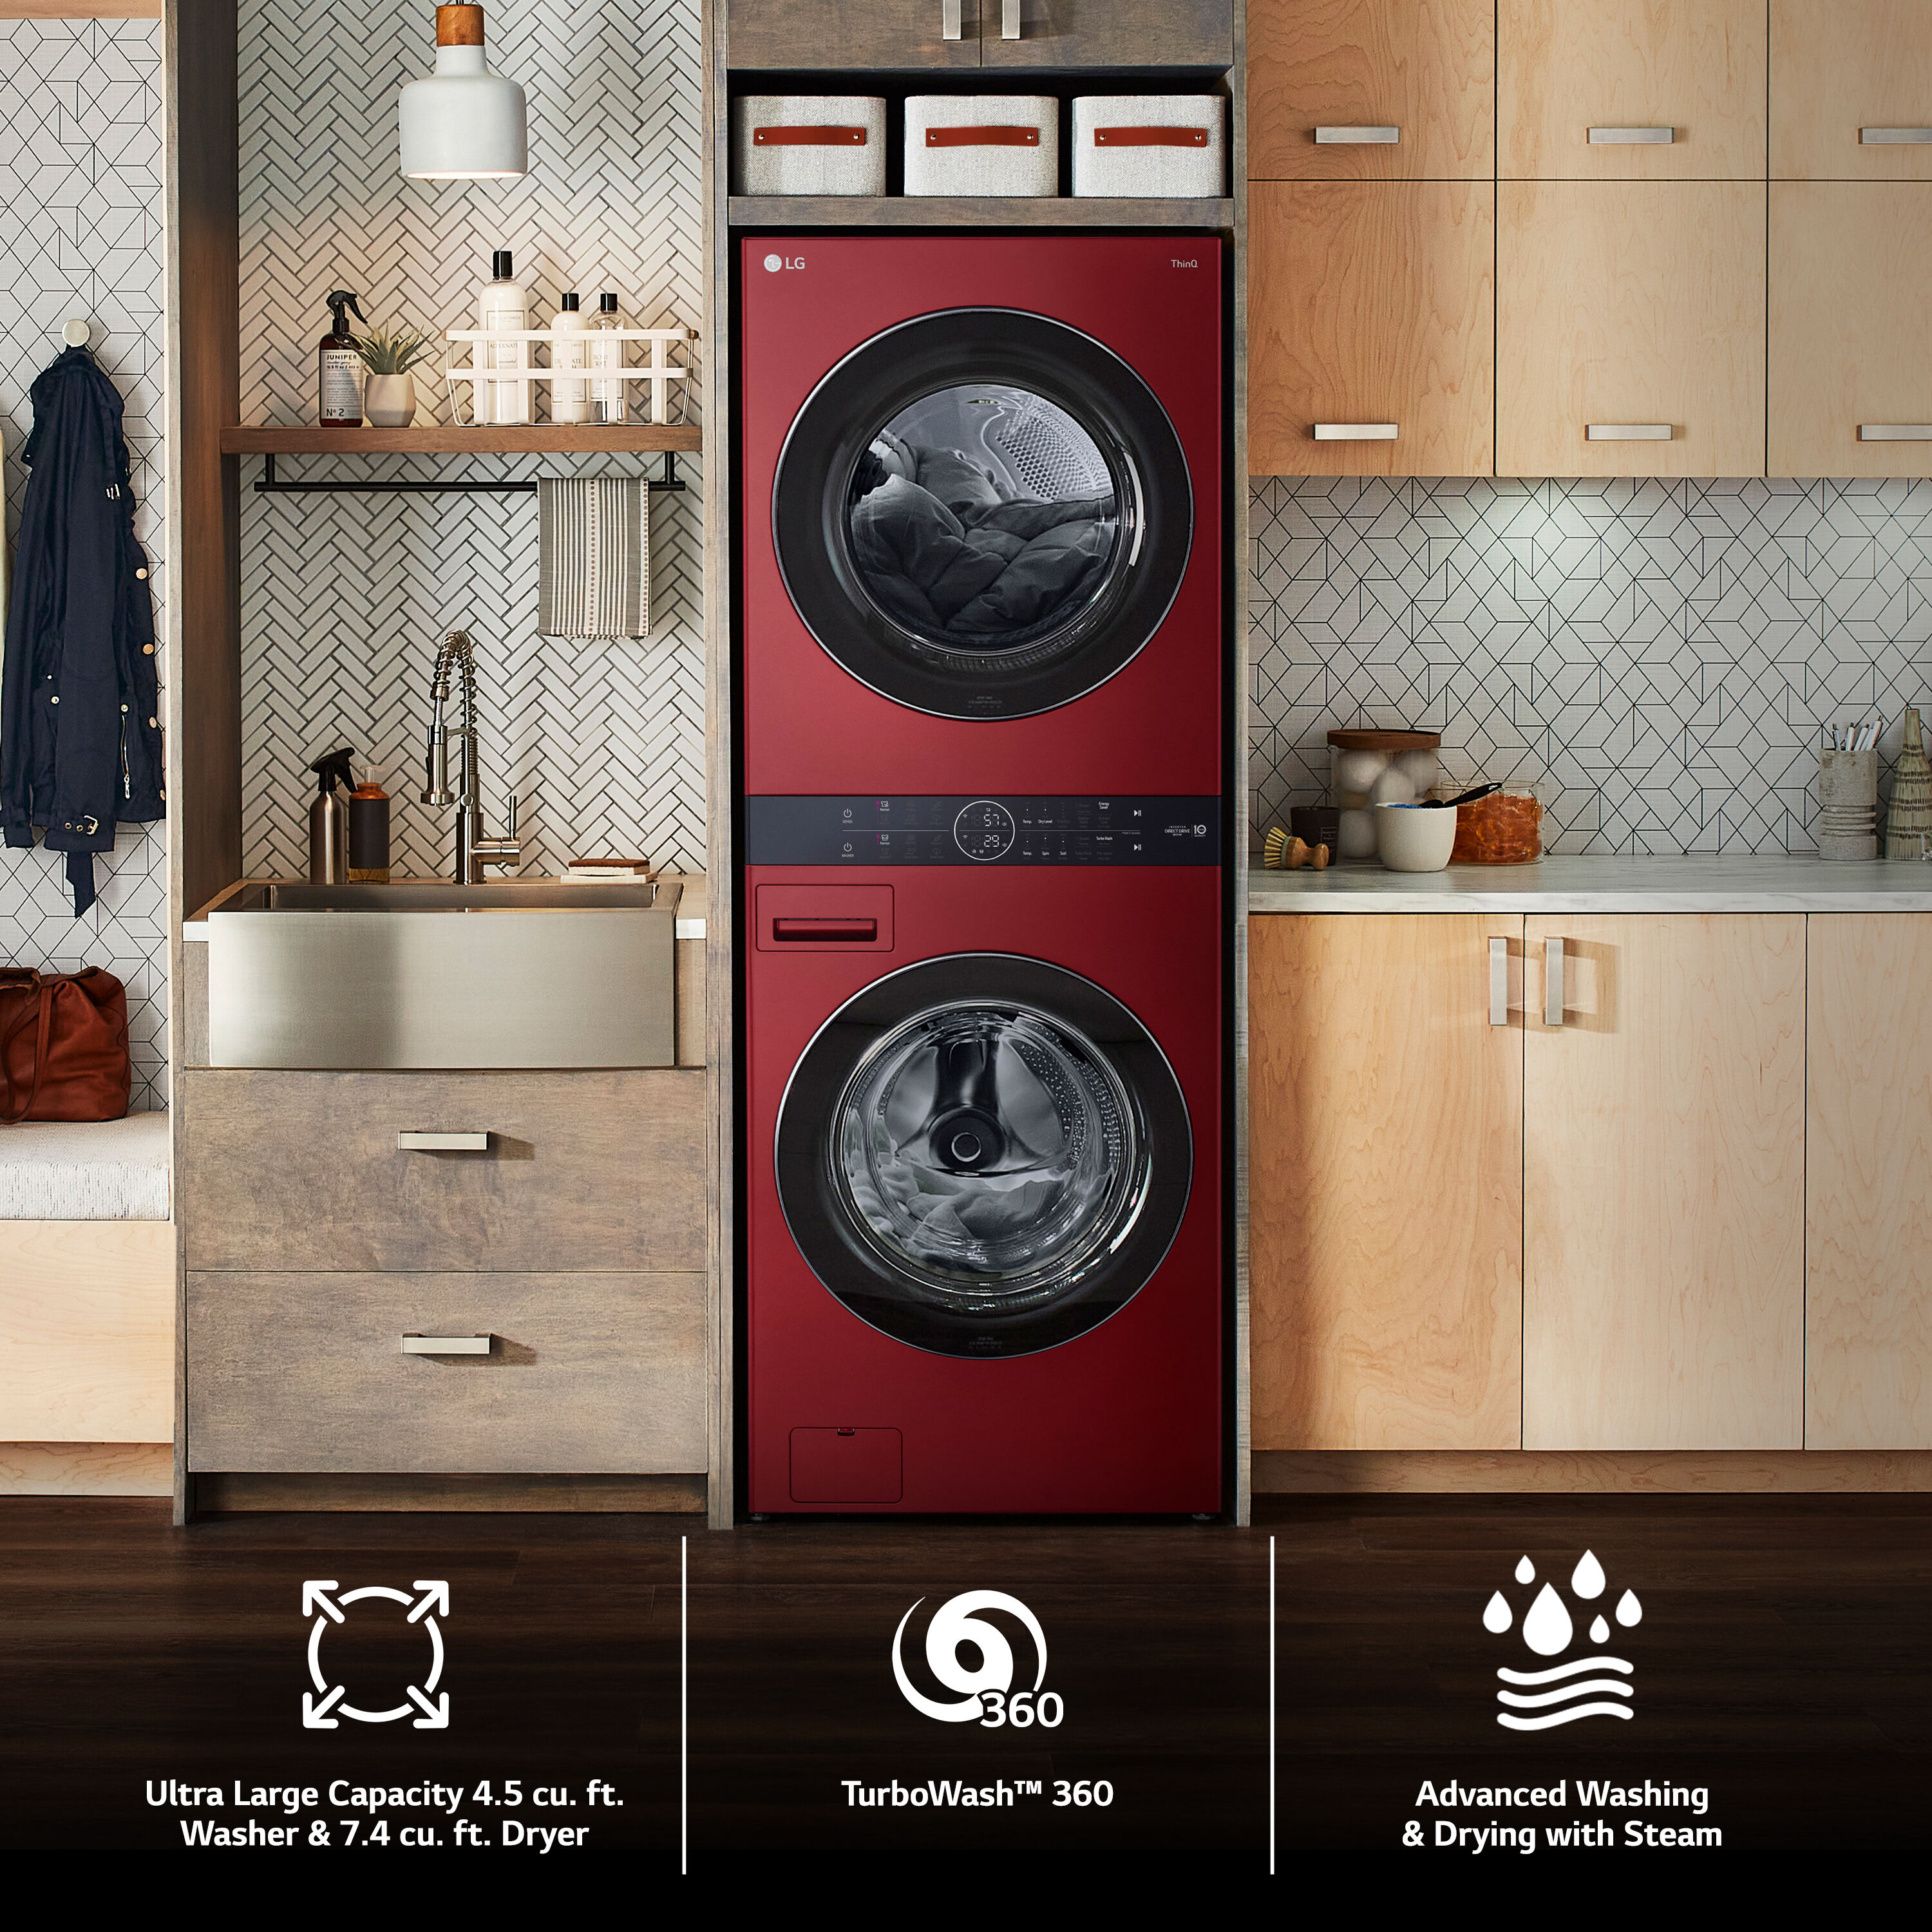 WashTower Stacked STAR) at LG (ENERGY and ft the Stacked department 7.4-cu Centers ft 4.5-cu Laundry with Laundry Dryer Washer Center Electric in